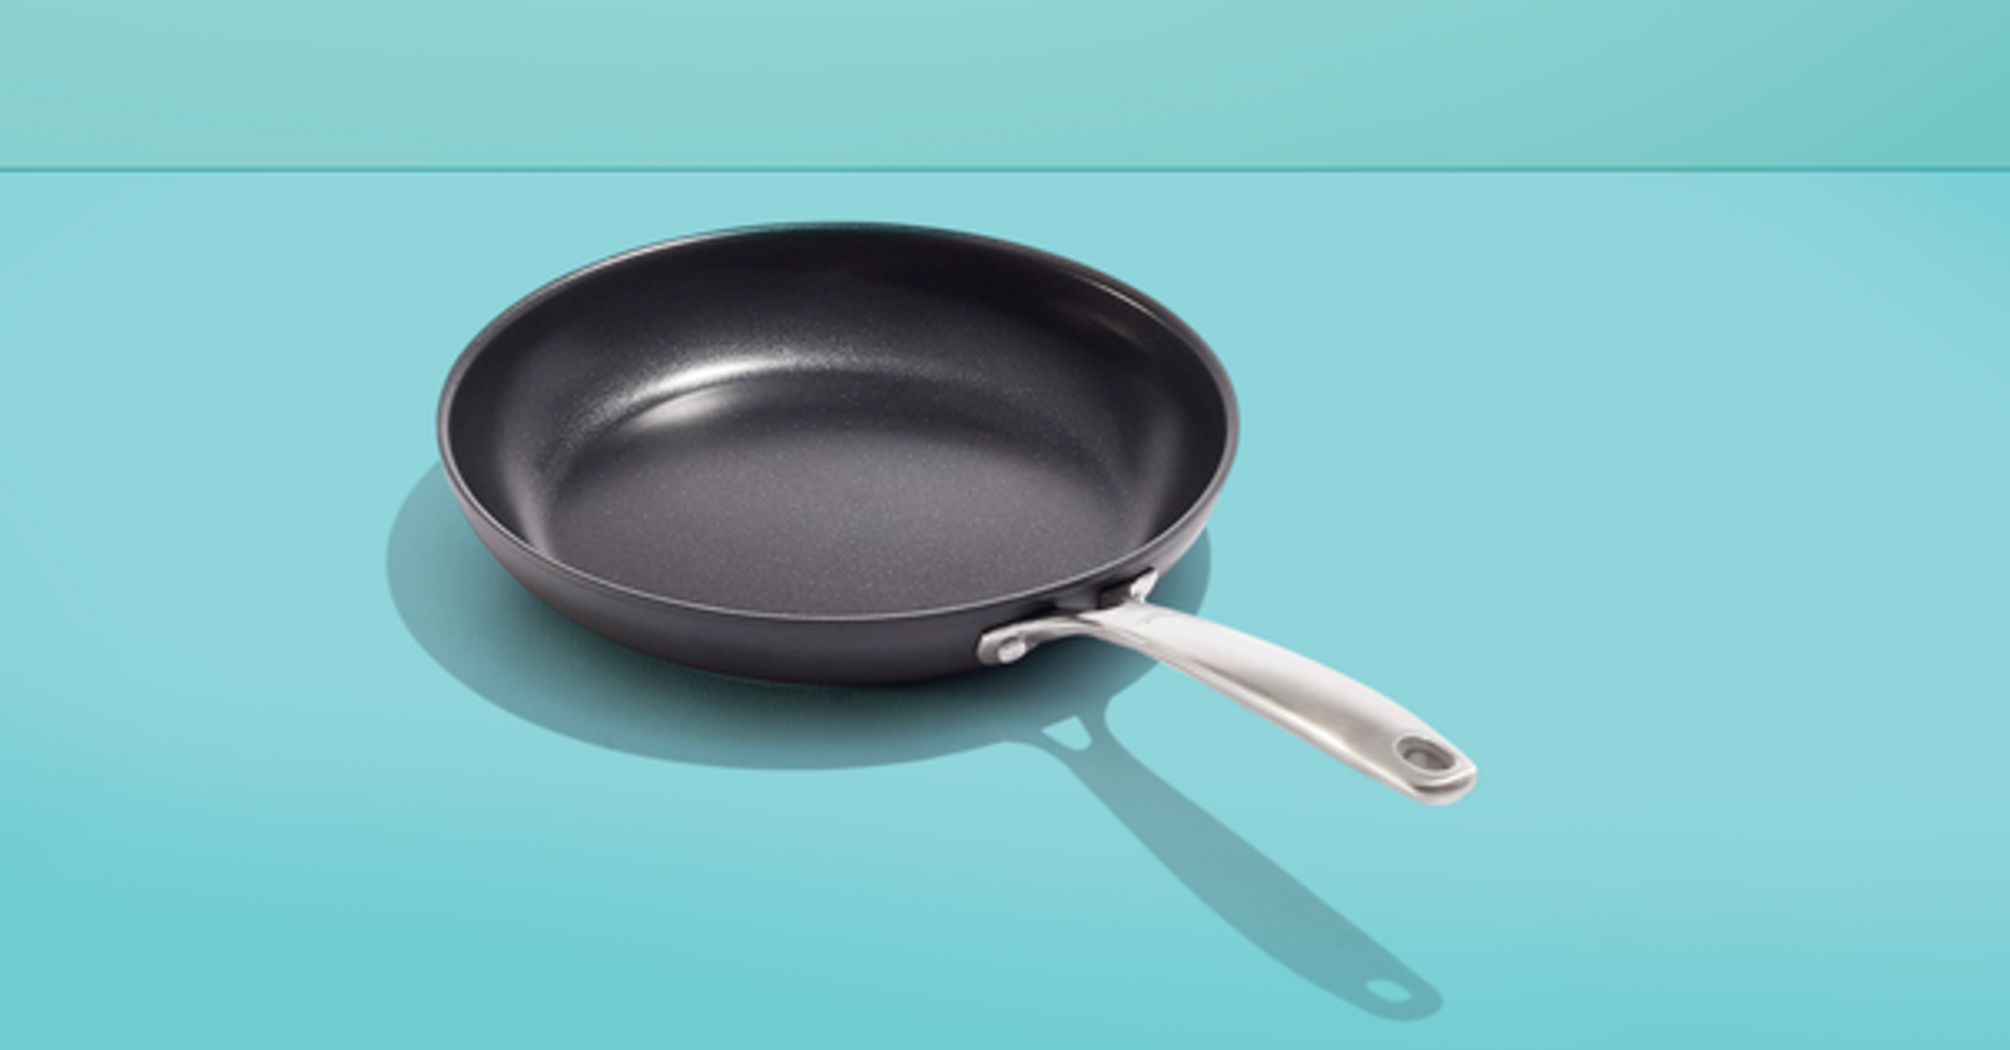 Pros and cons of cookware with non-stick coating